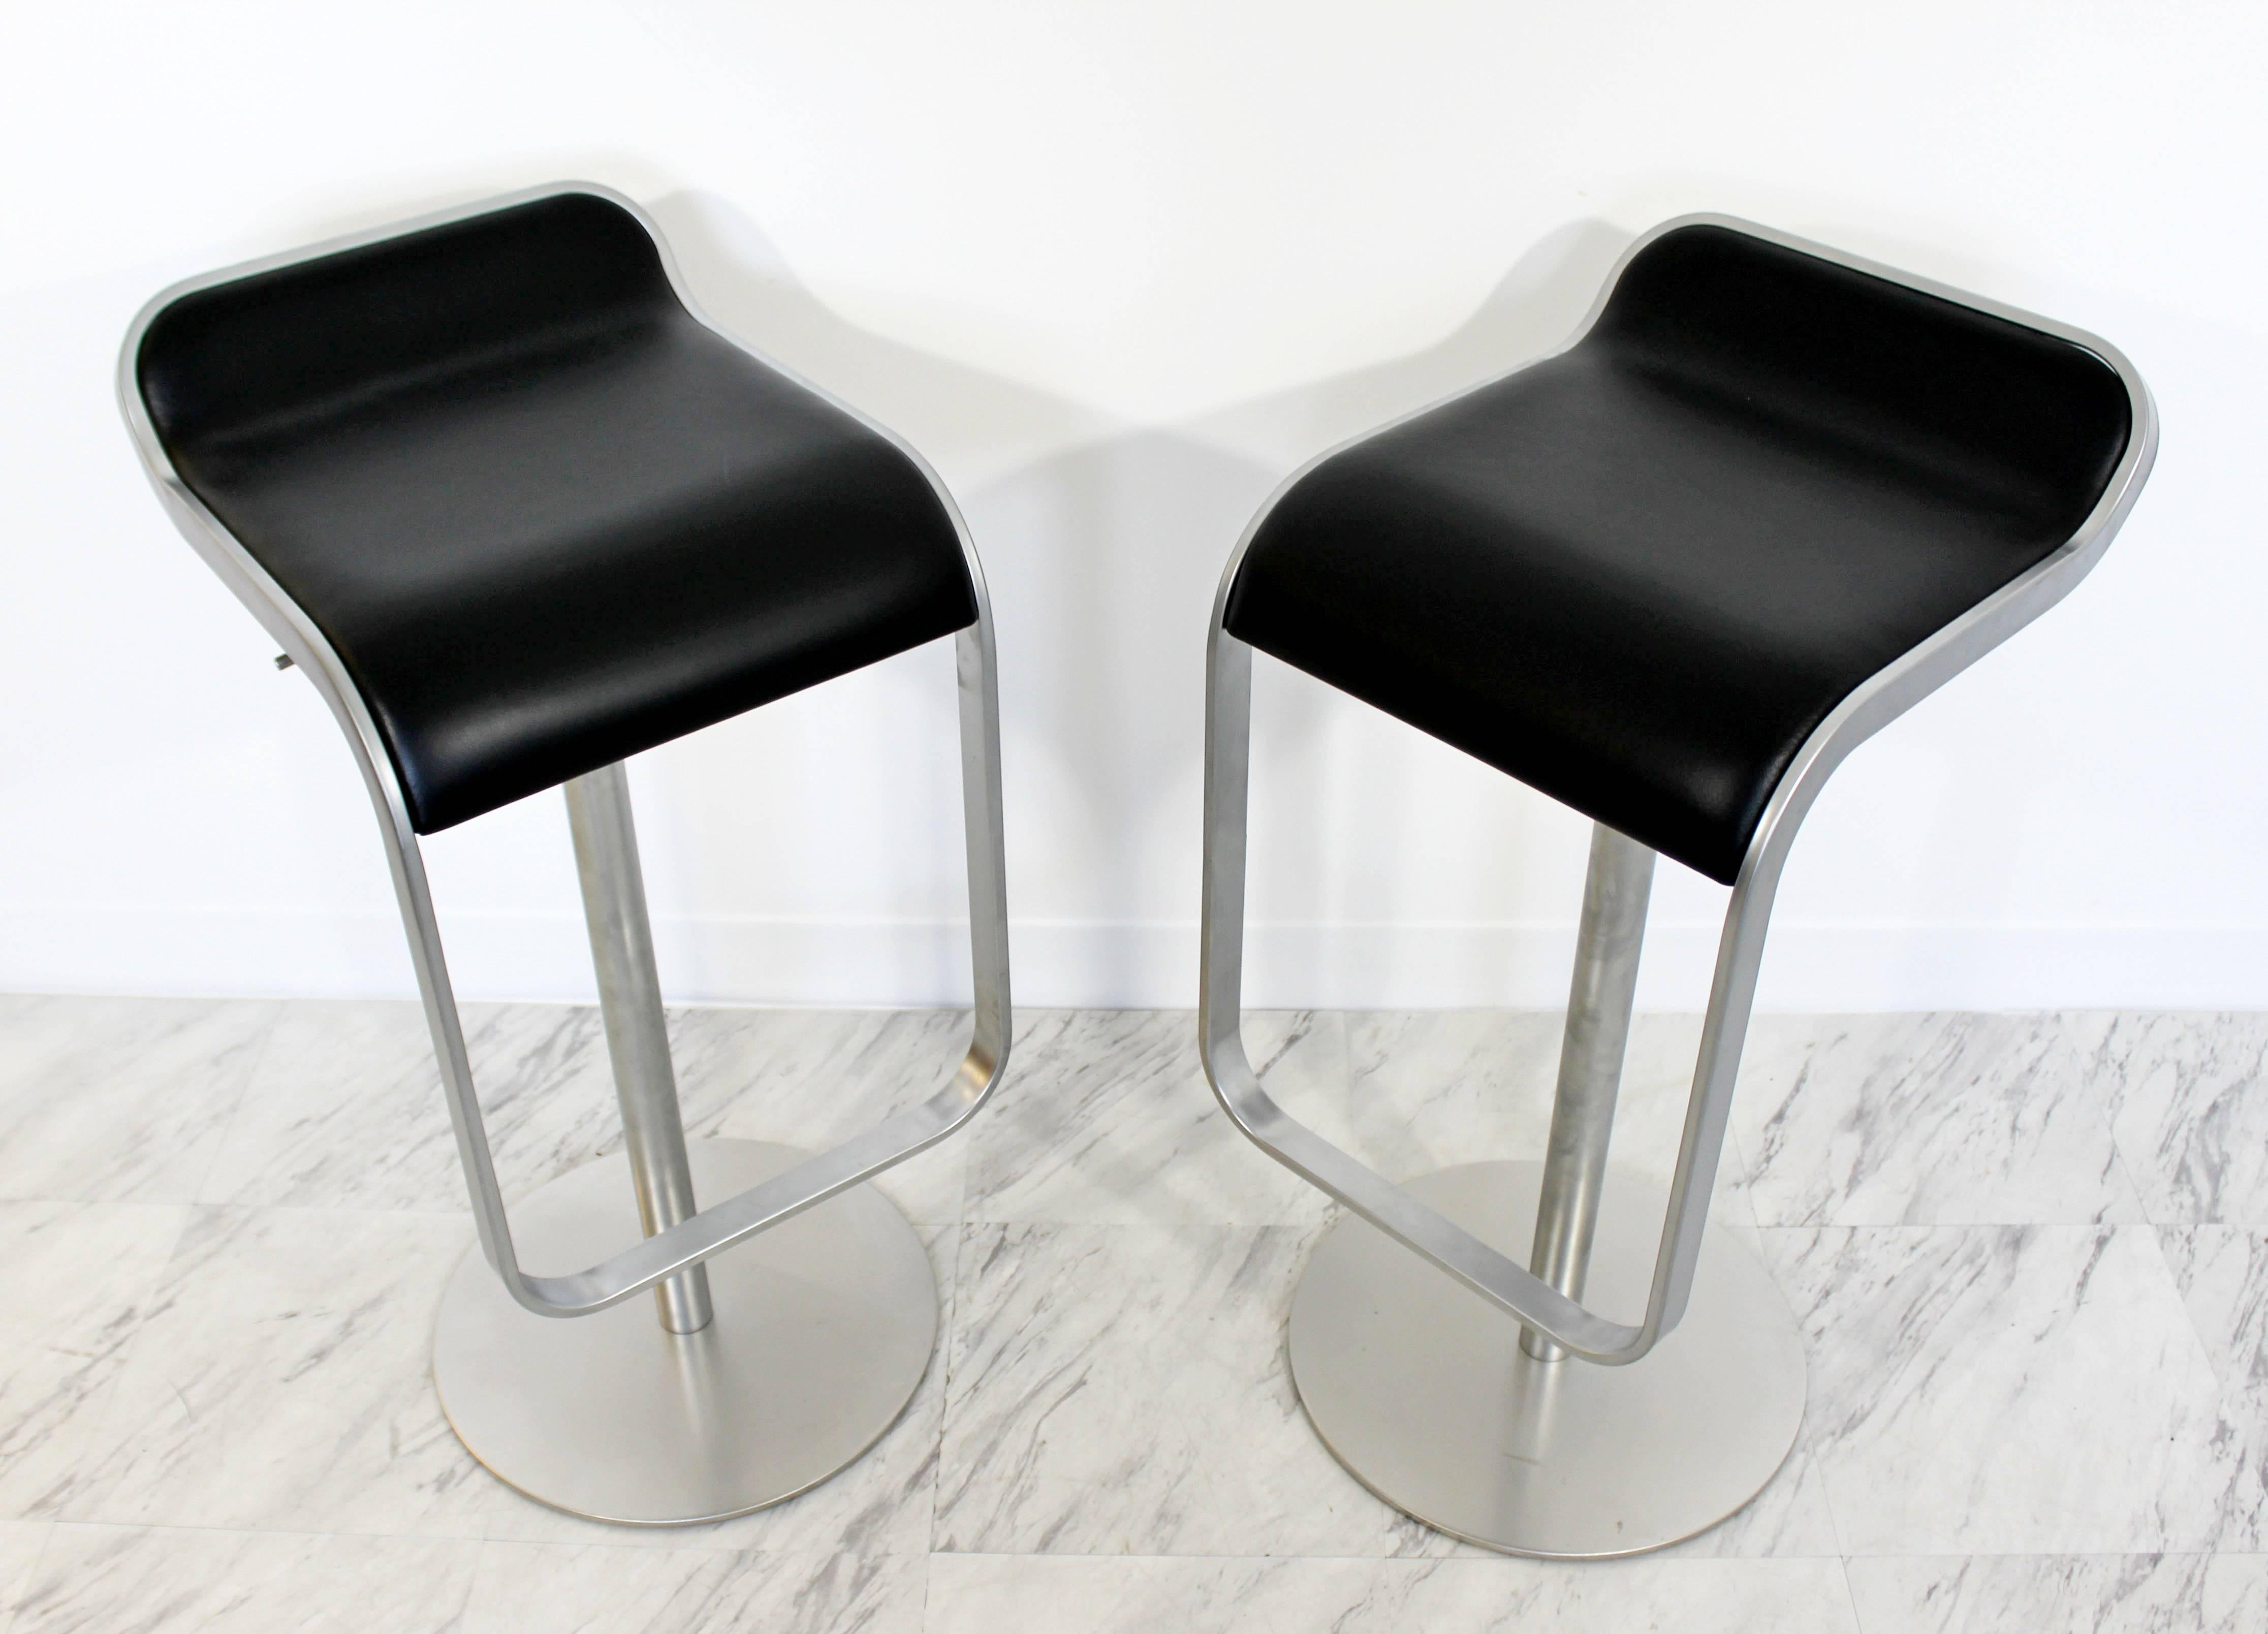 For your consideration is a gorgeous pair of aluminium, swivel bar stools, by Lapalma, made in Italy, circa the 1960s-1970s. In excellent condition. The dimensions are 14